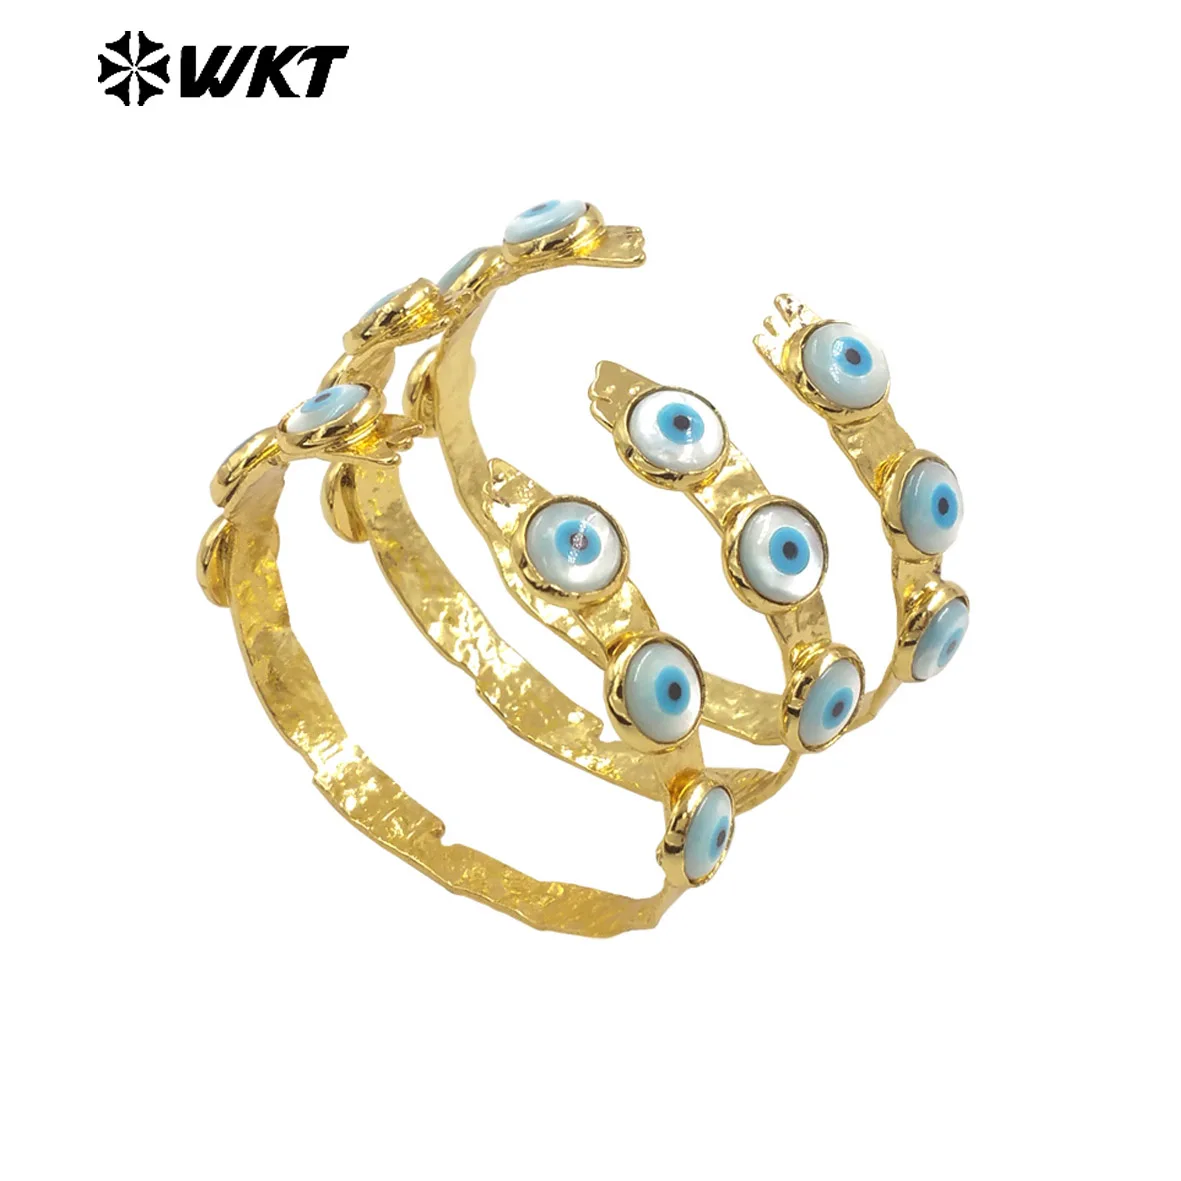 

WT-MPB112 Special Lovely Three Devil Eyes Shell Charms Cuff Yellow Brass Bangle For Girls Children Birthday Party Gifts